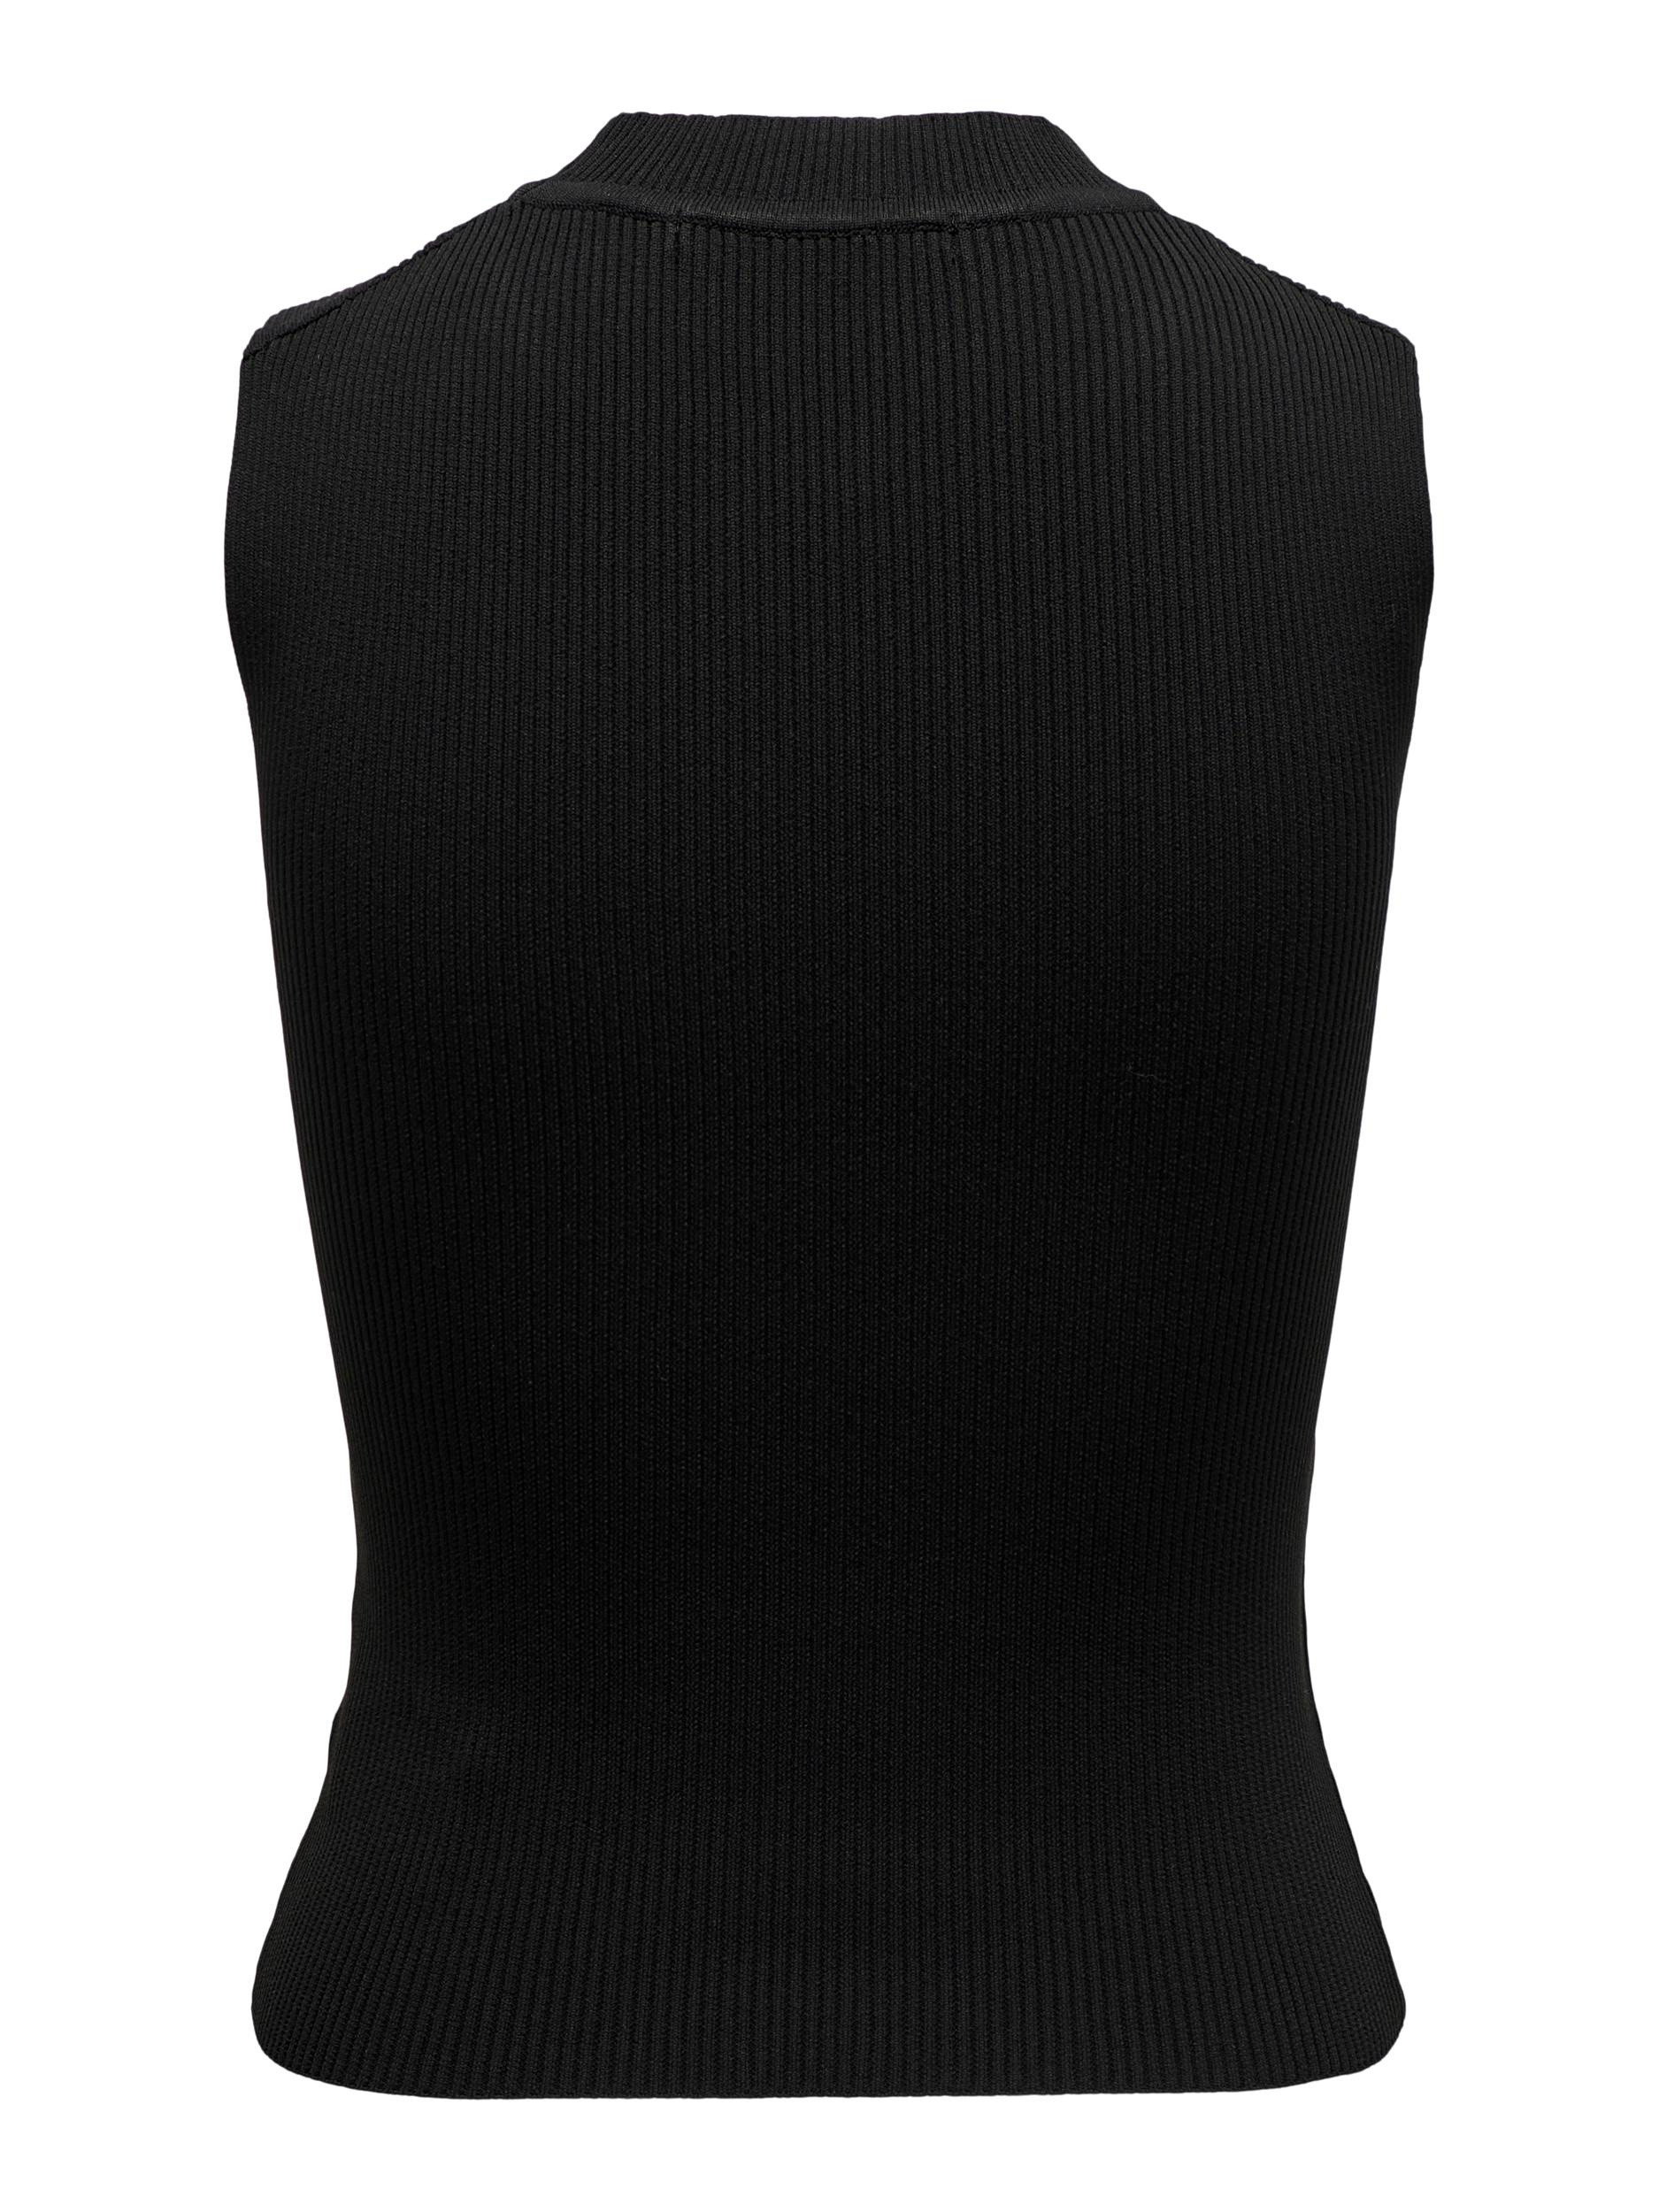 Only - Knitted top, Black, large image number 1